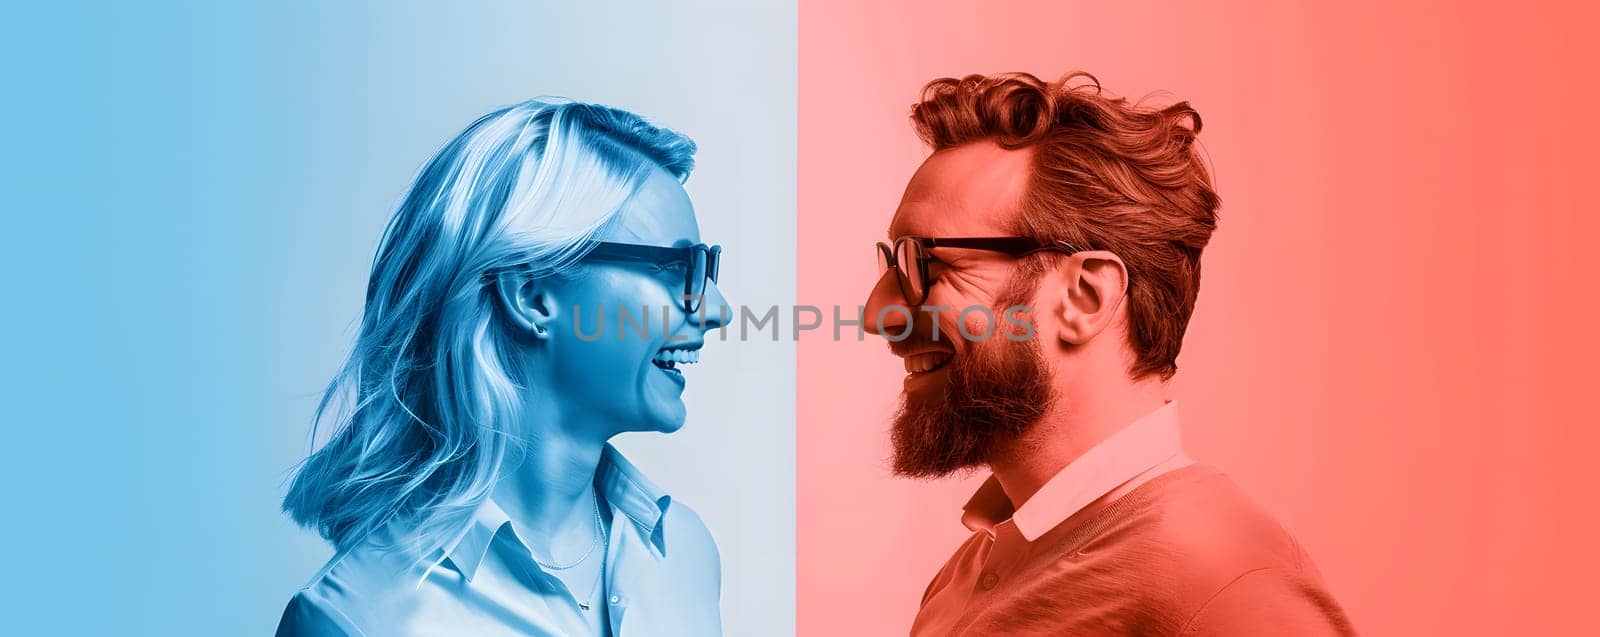 A man and a woman are making eye contact against a vibrant blue and red background, showcasing a mix of intense jawline and elegant gesture in an artistic fusion of electric blue and magenta hues